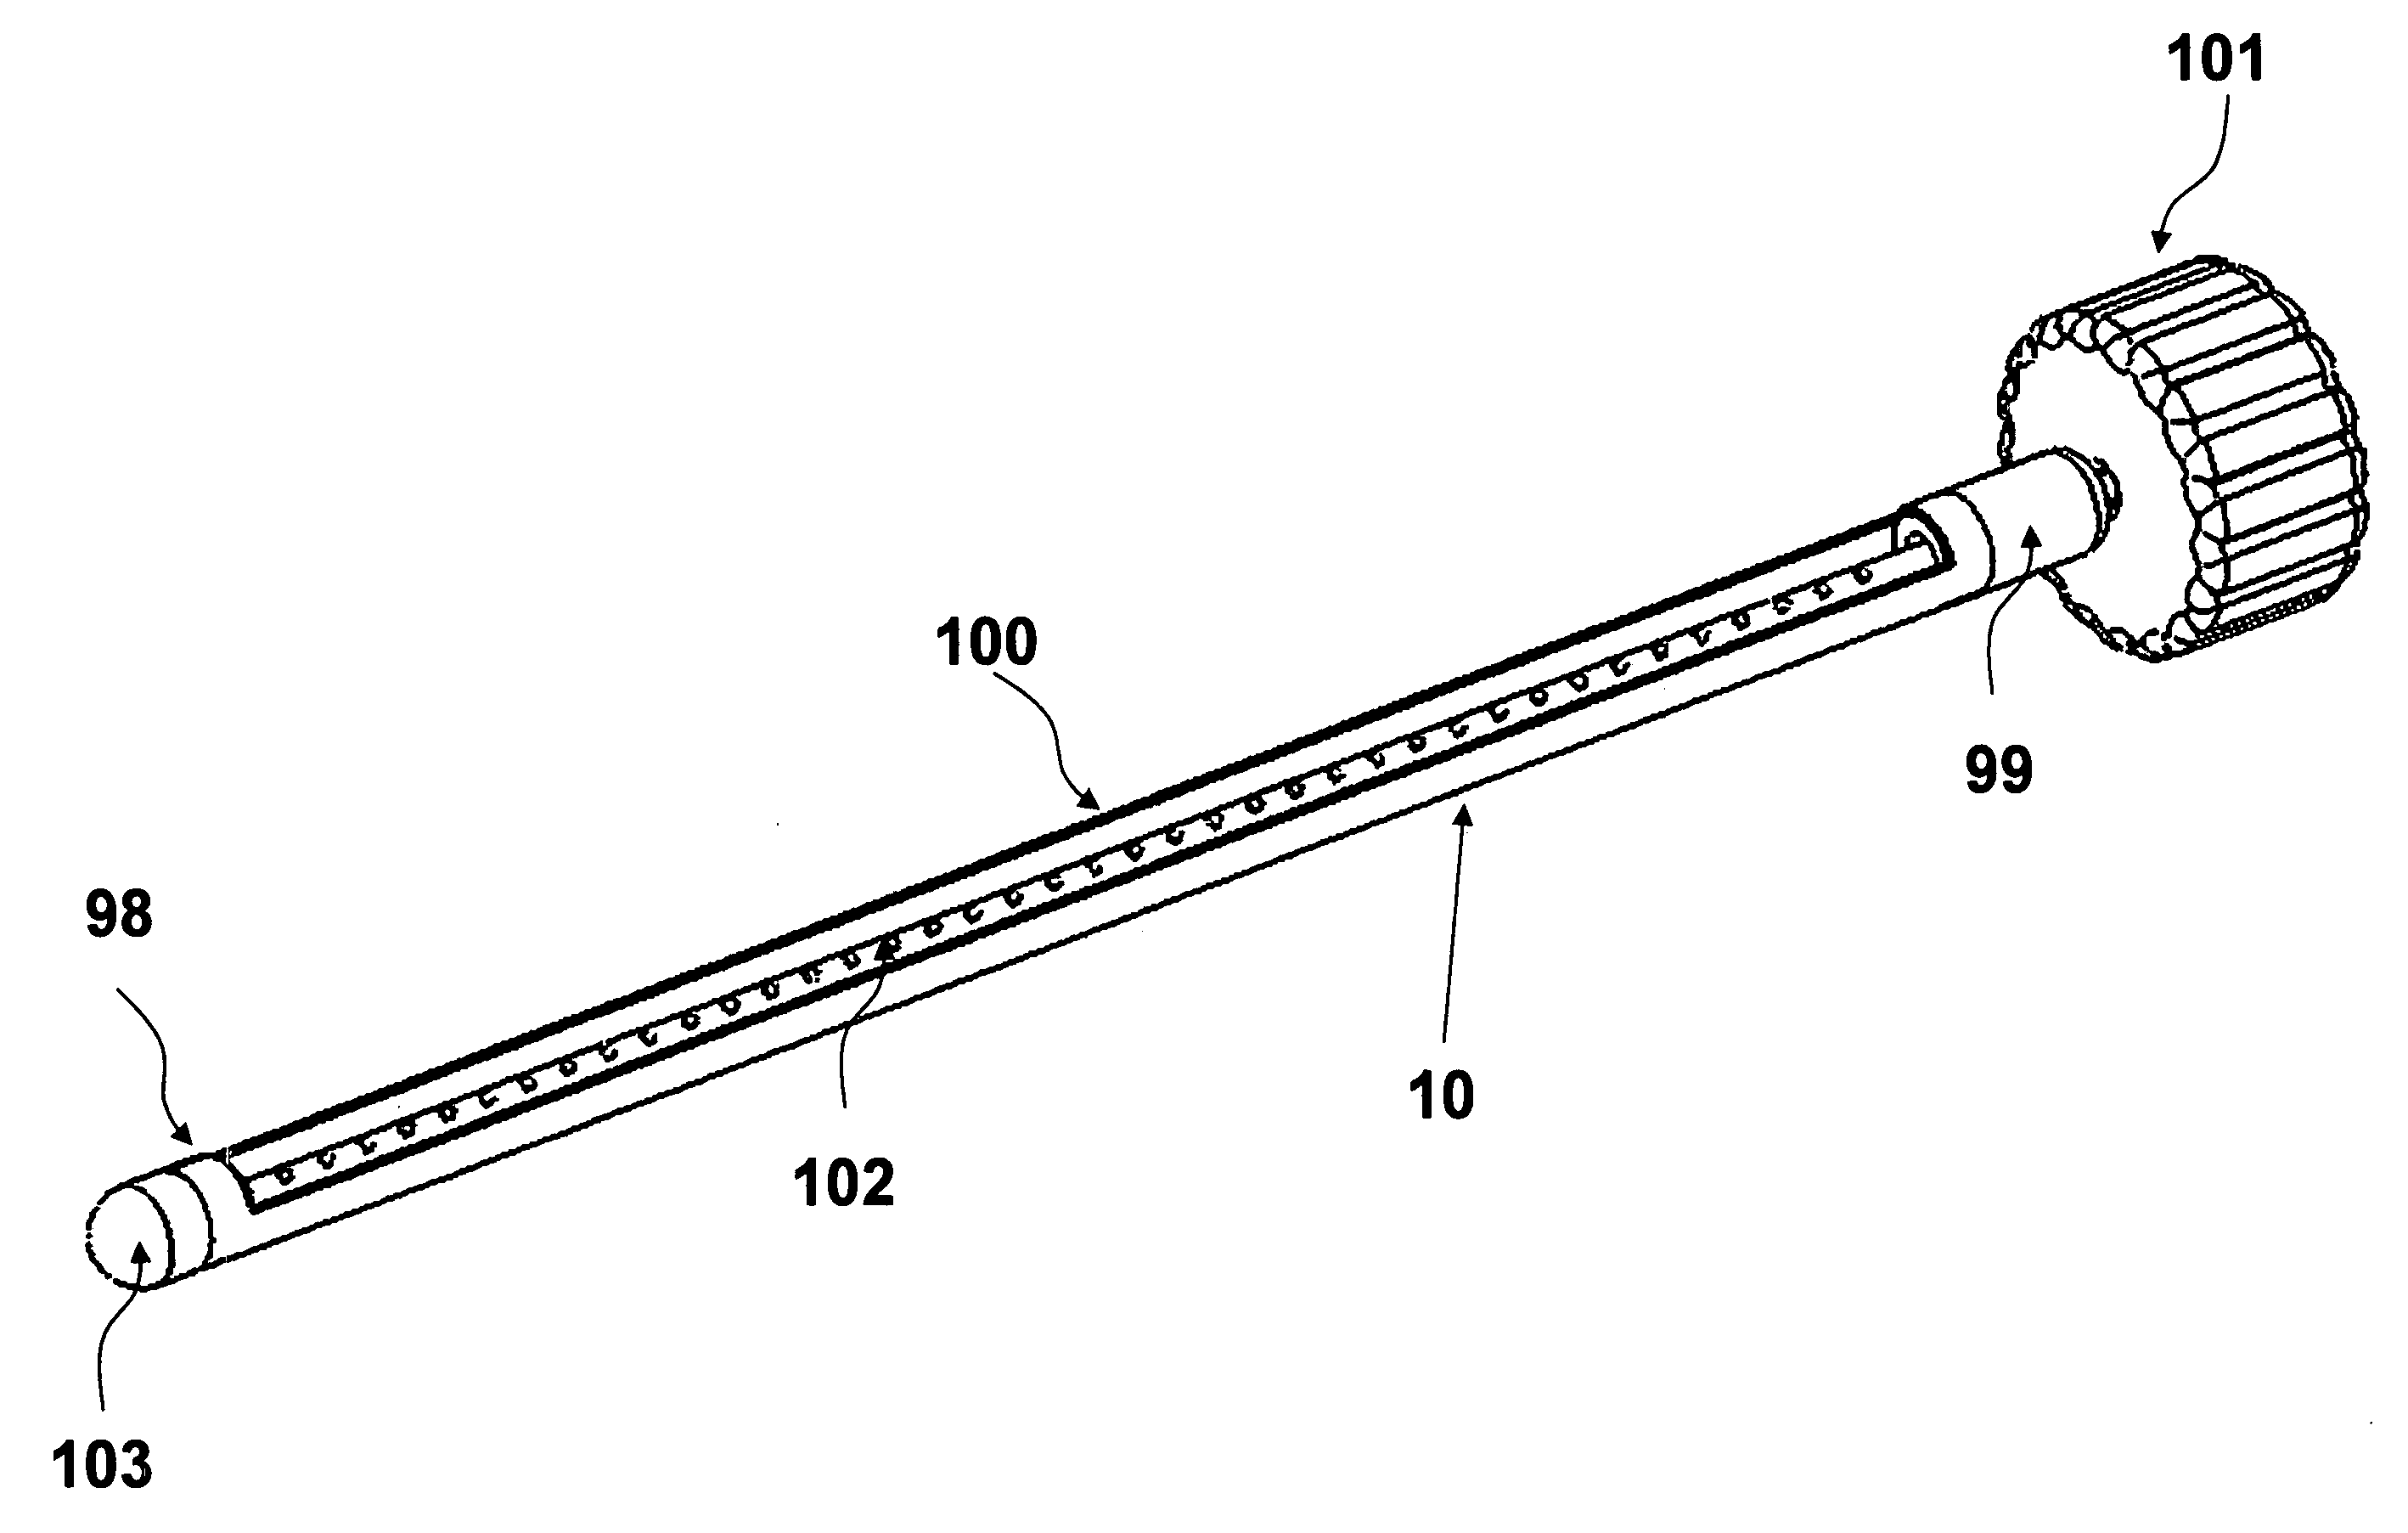 Surgical material applicator